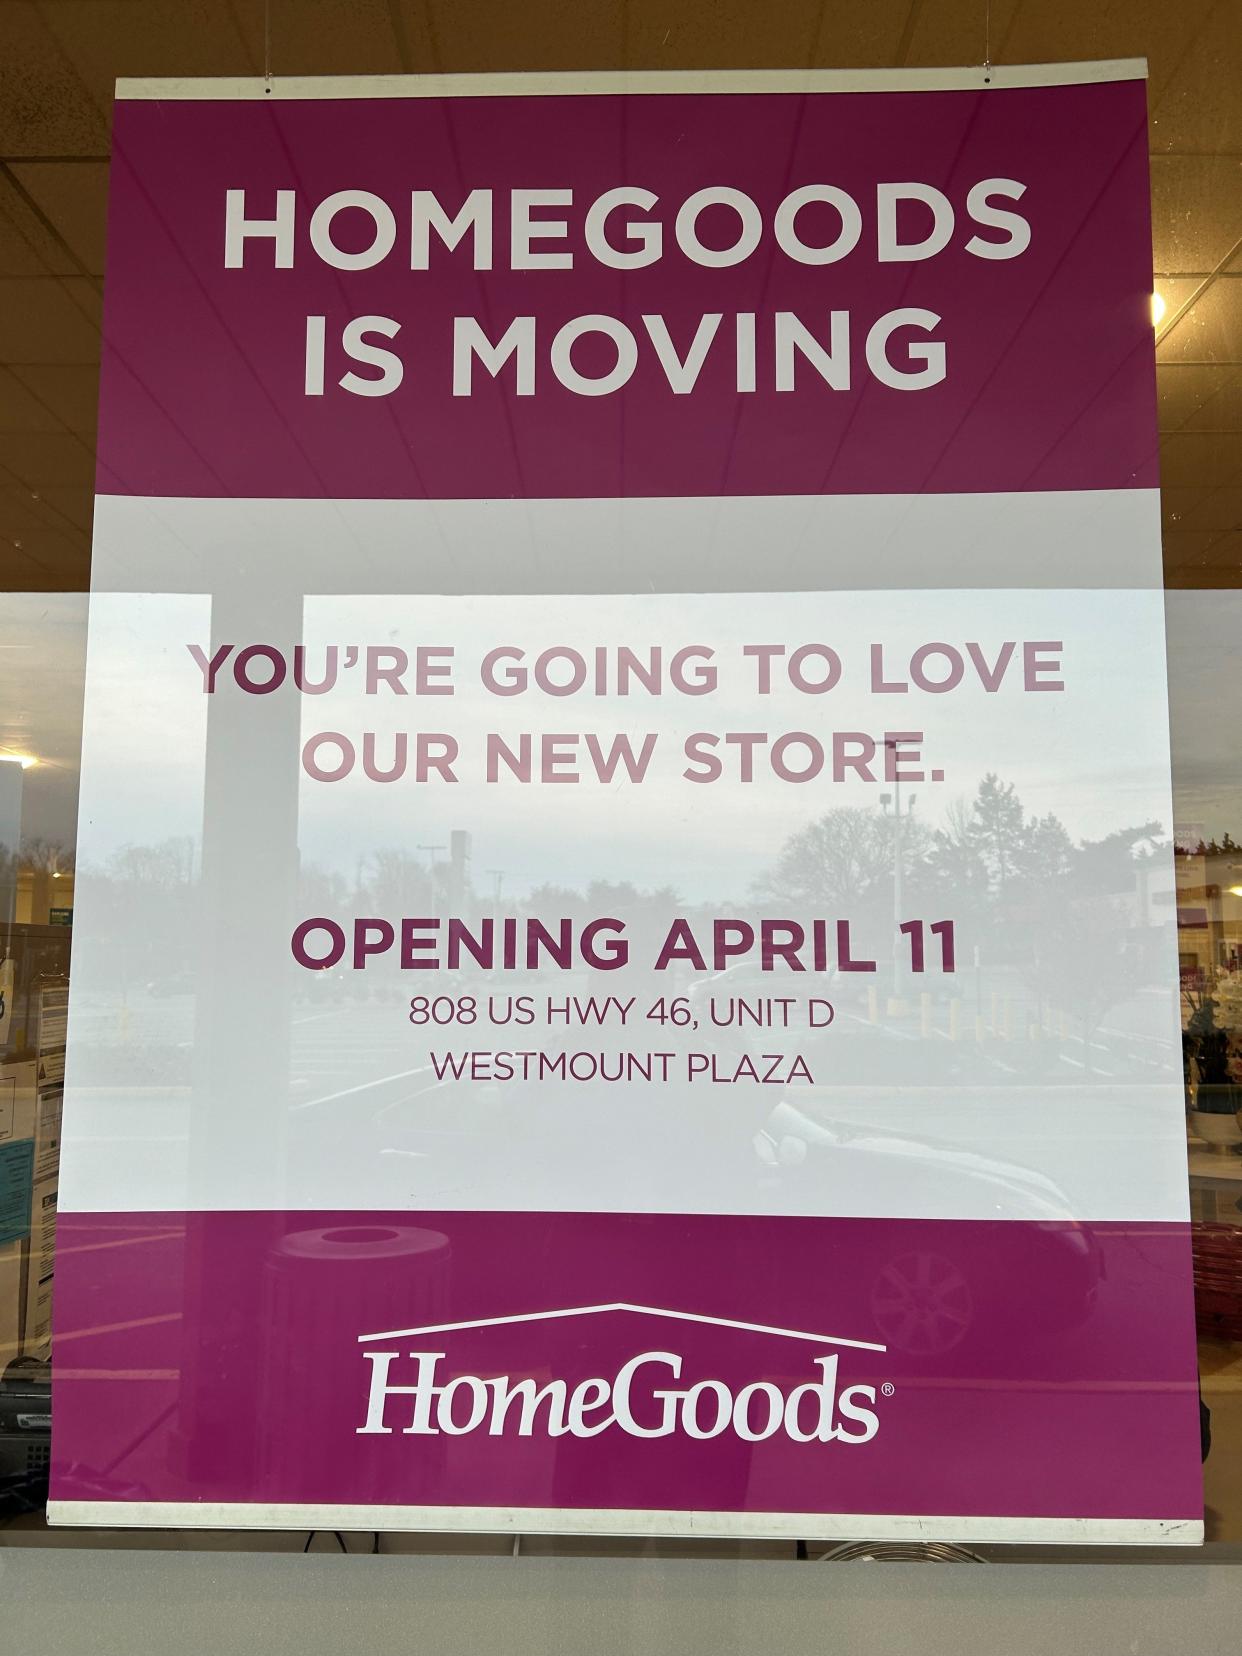 A sign at the Home Goods location at Morris Hills Shopping Center announces the April 11 opening of a new location at Westmount Plaza in Parsippany. This location will close April 4, as will the neighboring Marshalls store.